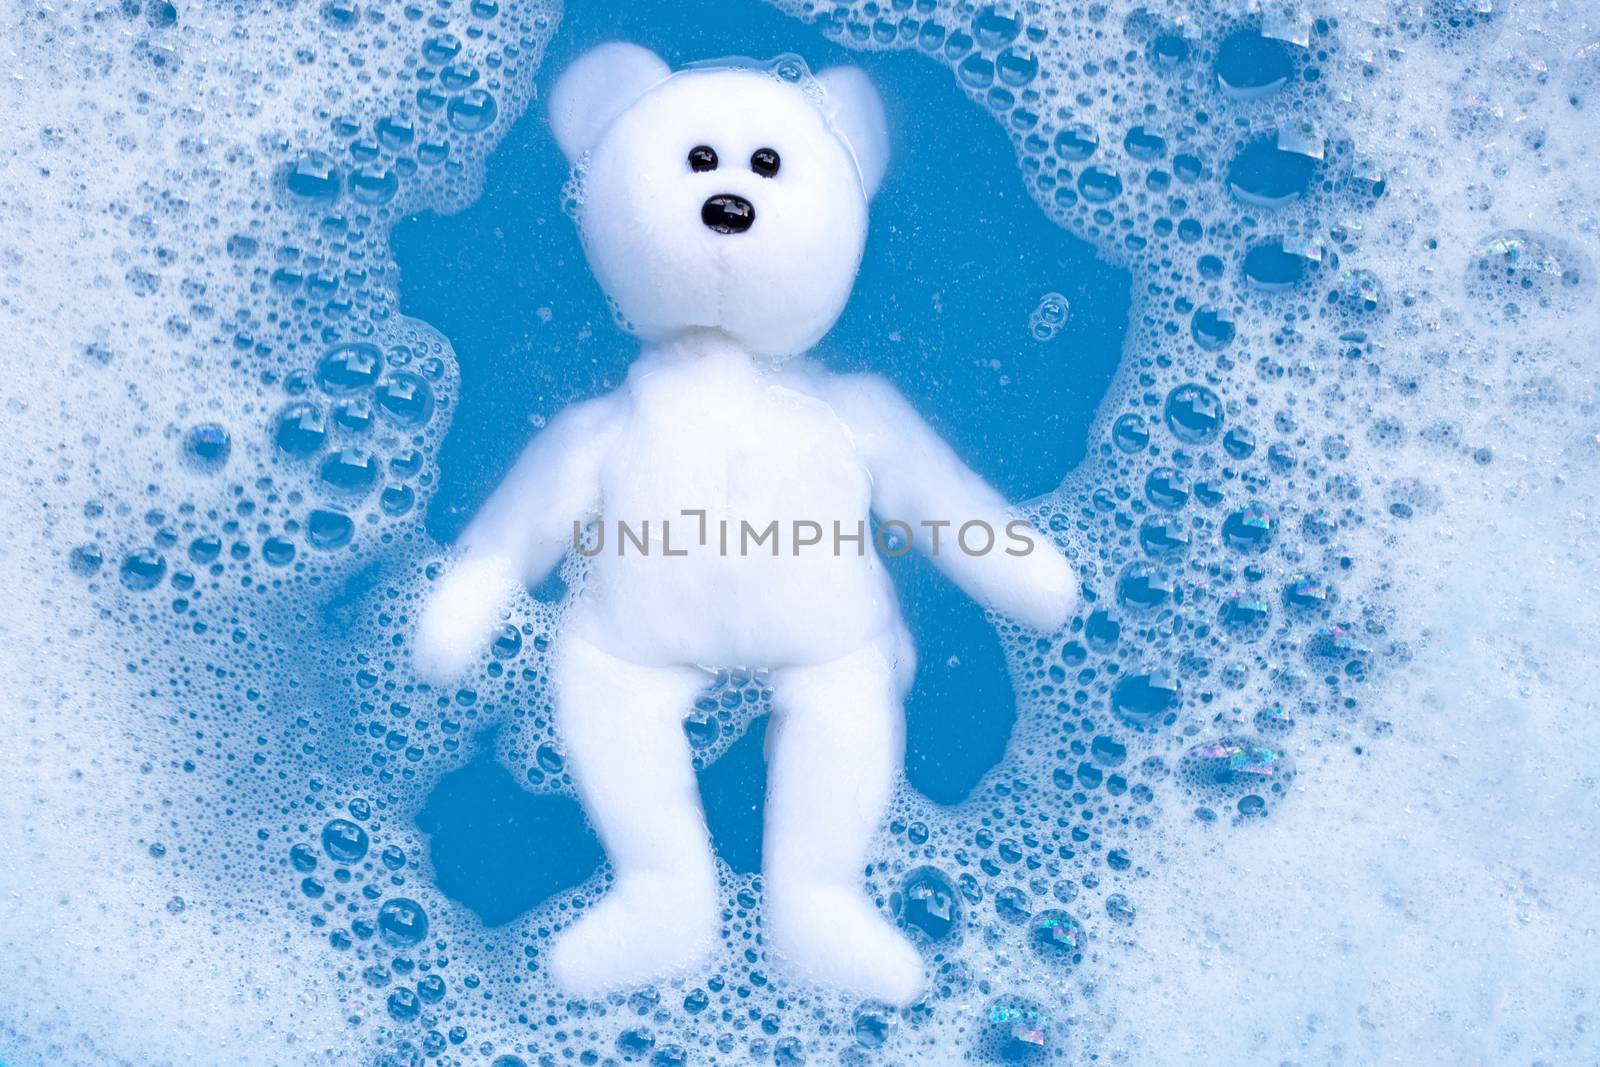 Soaking bear toy in laundry detergent water dissolution before w by Bowonpat